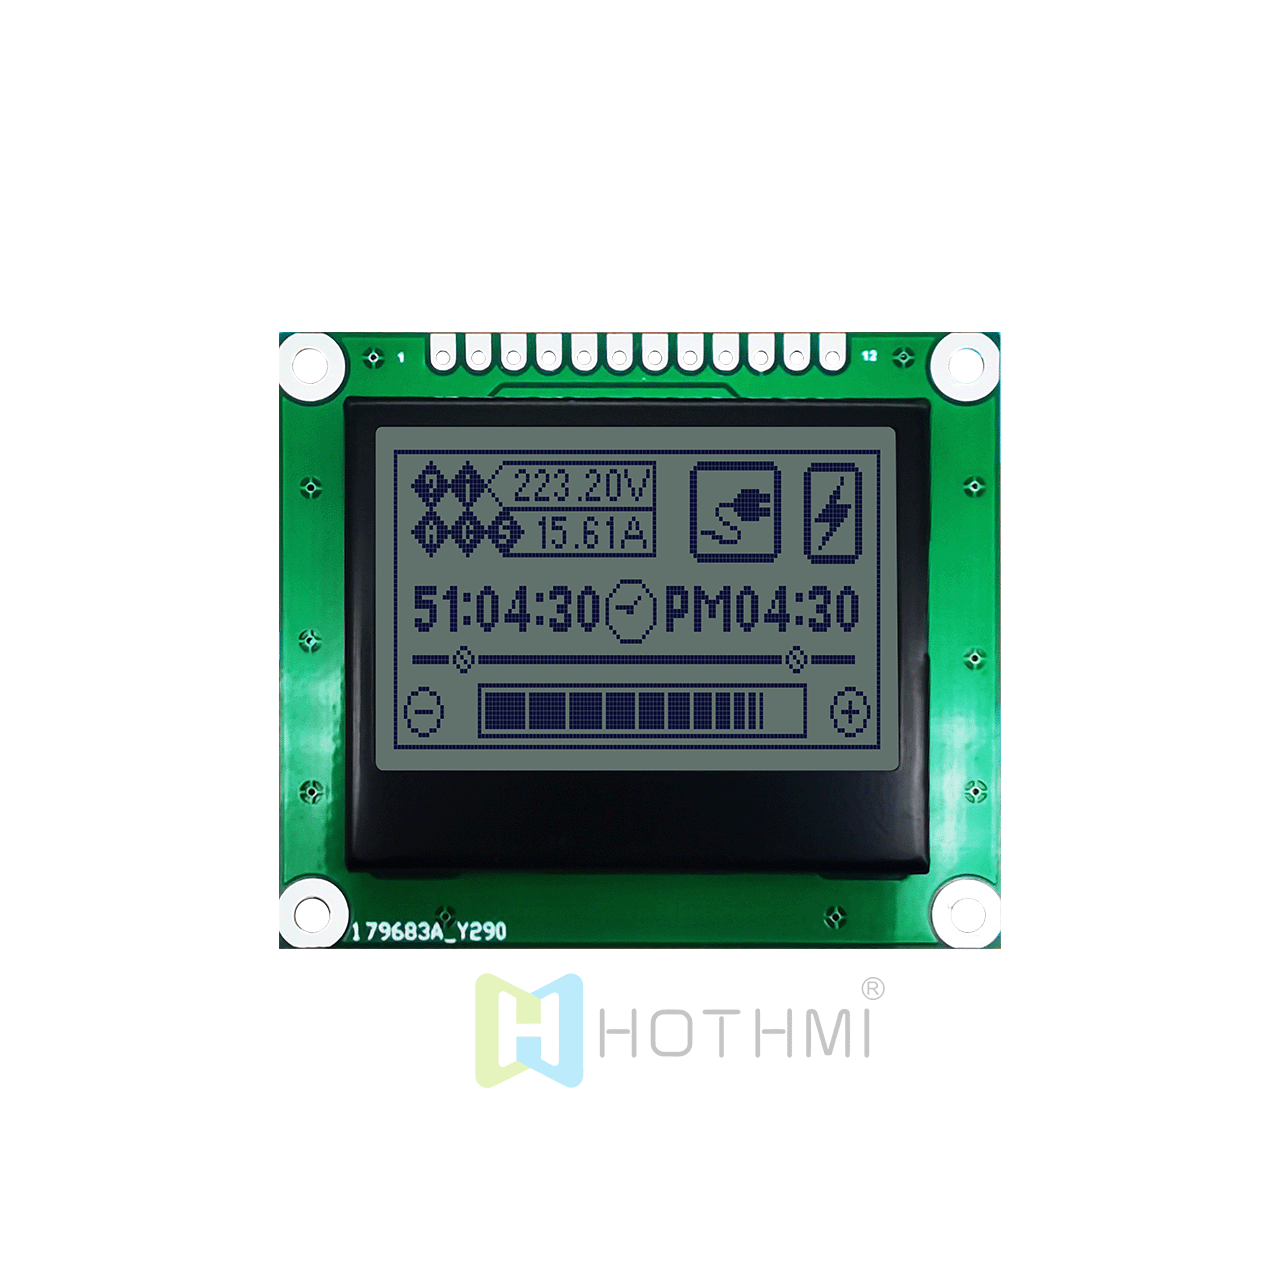 1.7" 128x64 Graphic LCD Block | 128 x 64 Graphic LCD | | STN + Yellow-Green Backlight | 3.3V